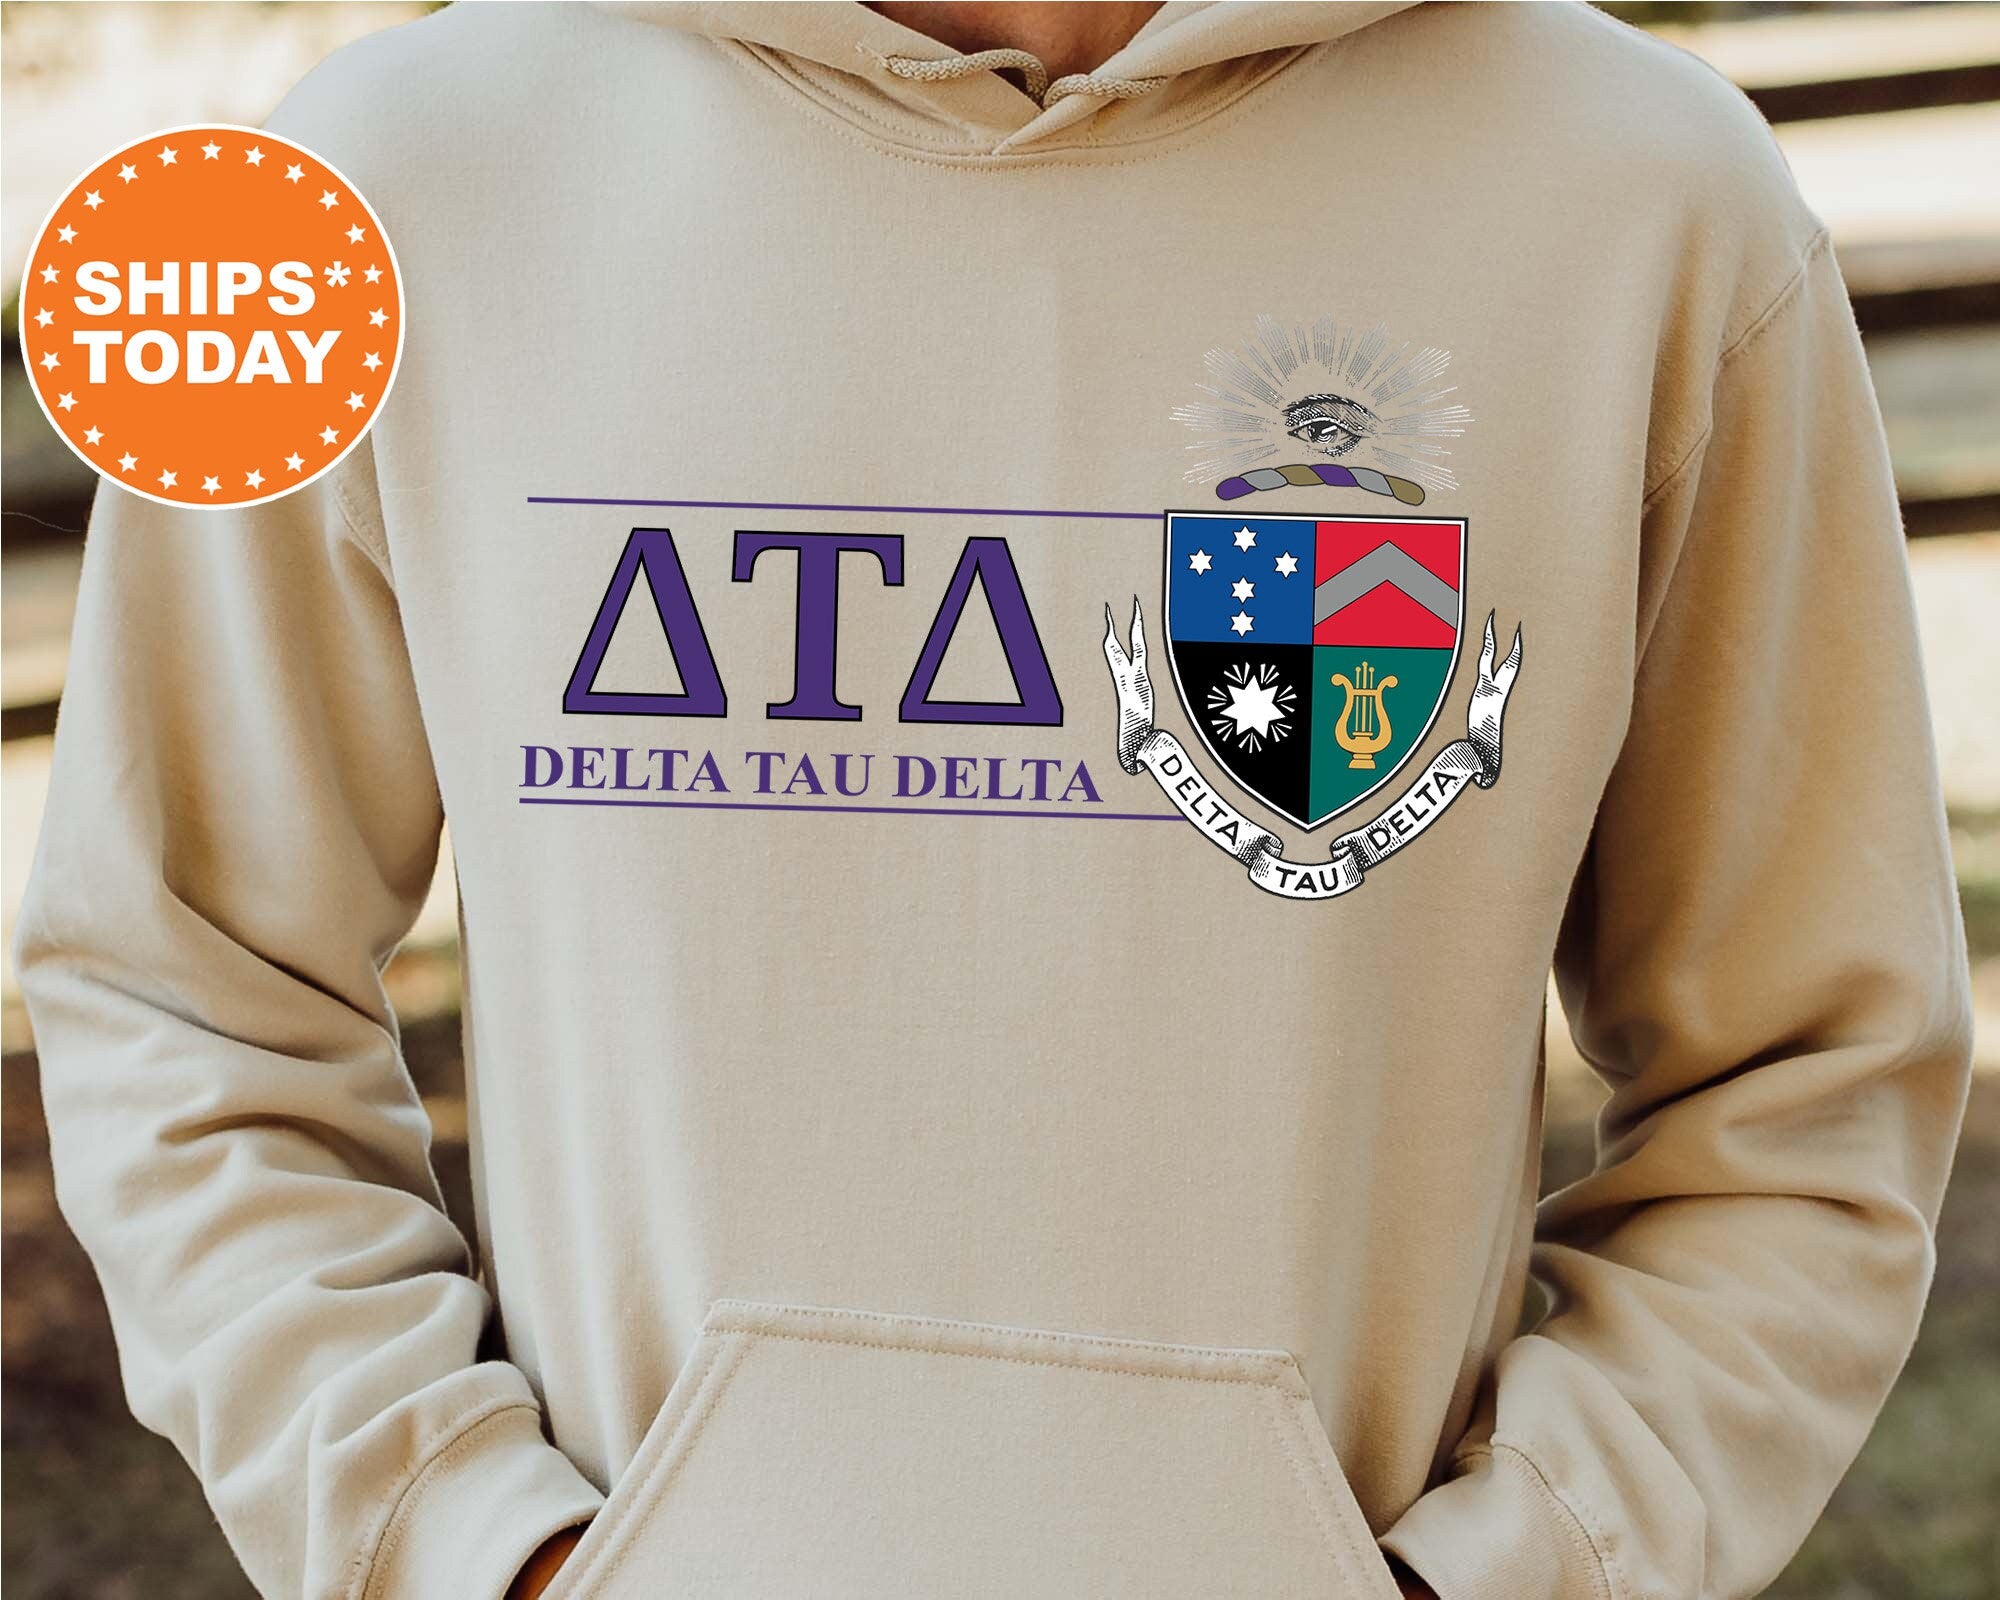 Delta Tau Delta Collection - SHIPS TODAY - Kite and Crest